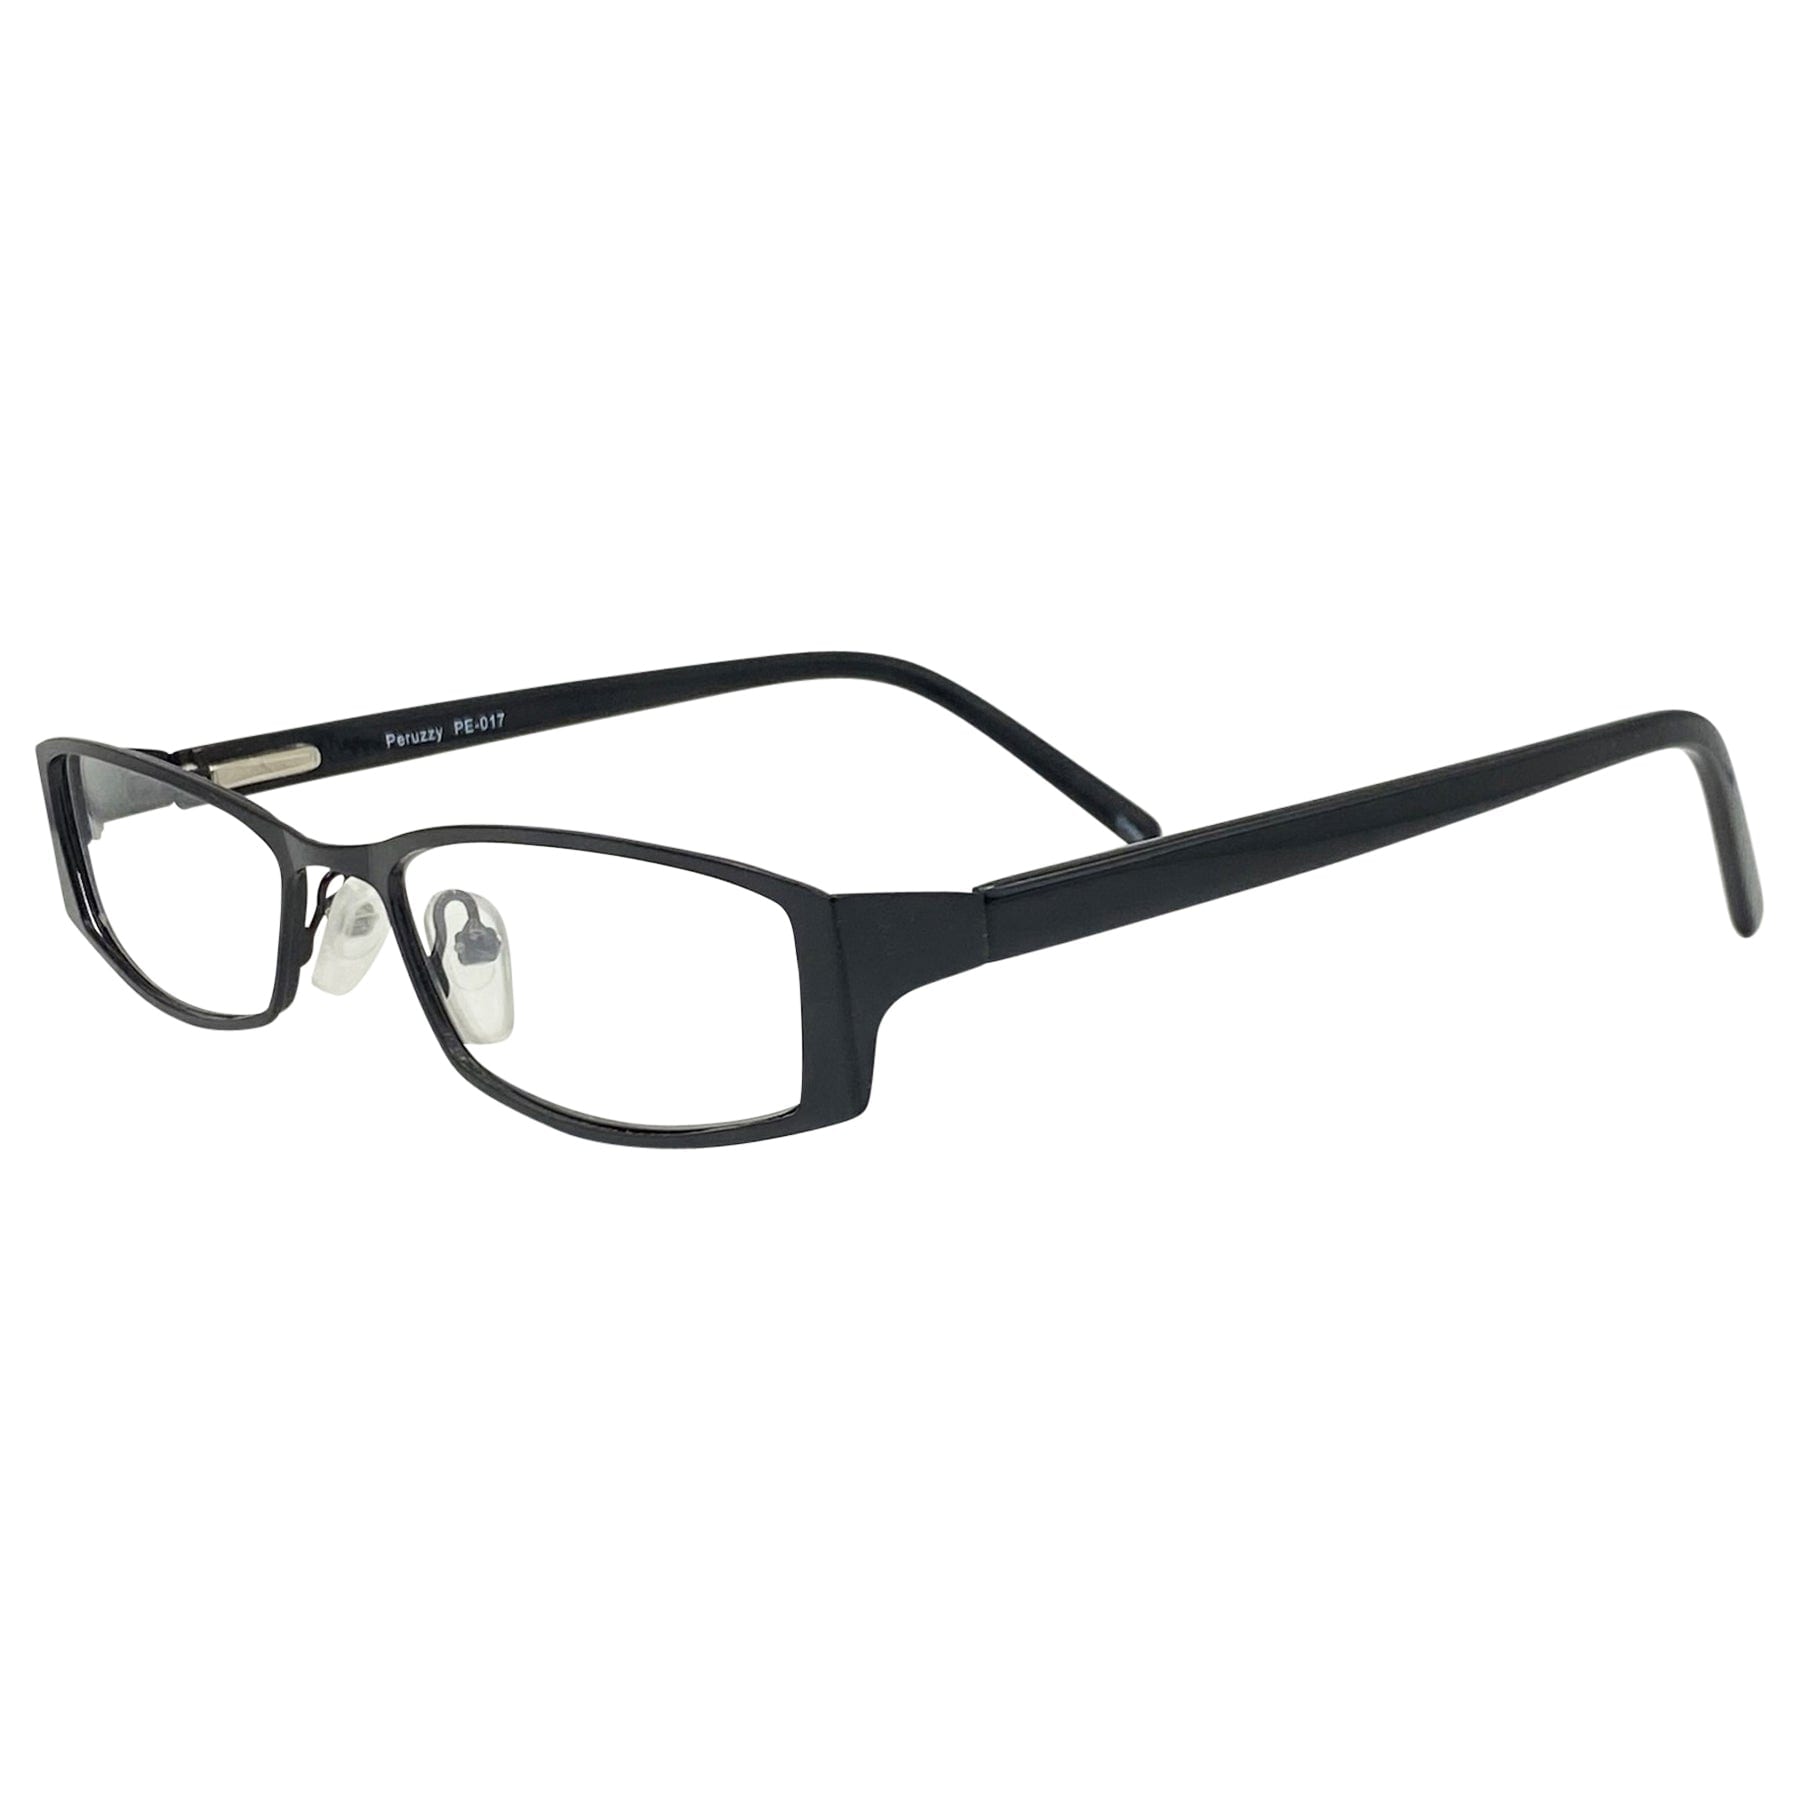 cat-eye glasses with a matte black metal frame and clear lens